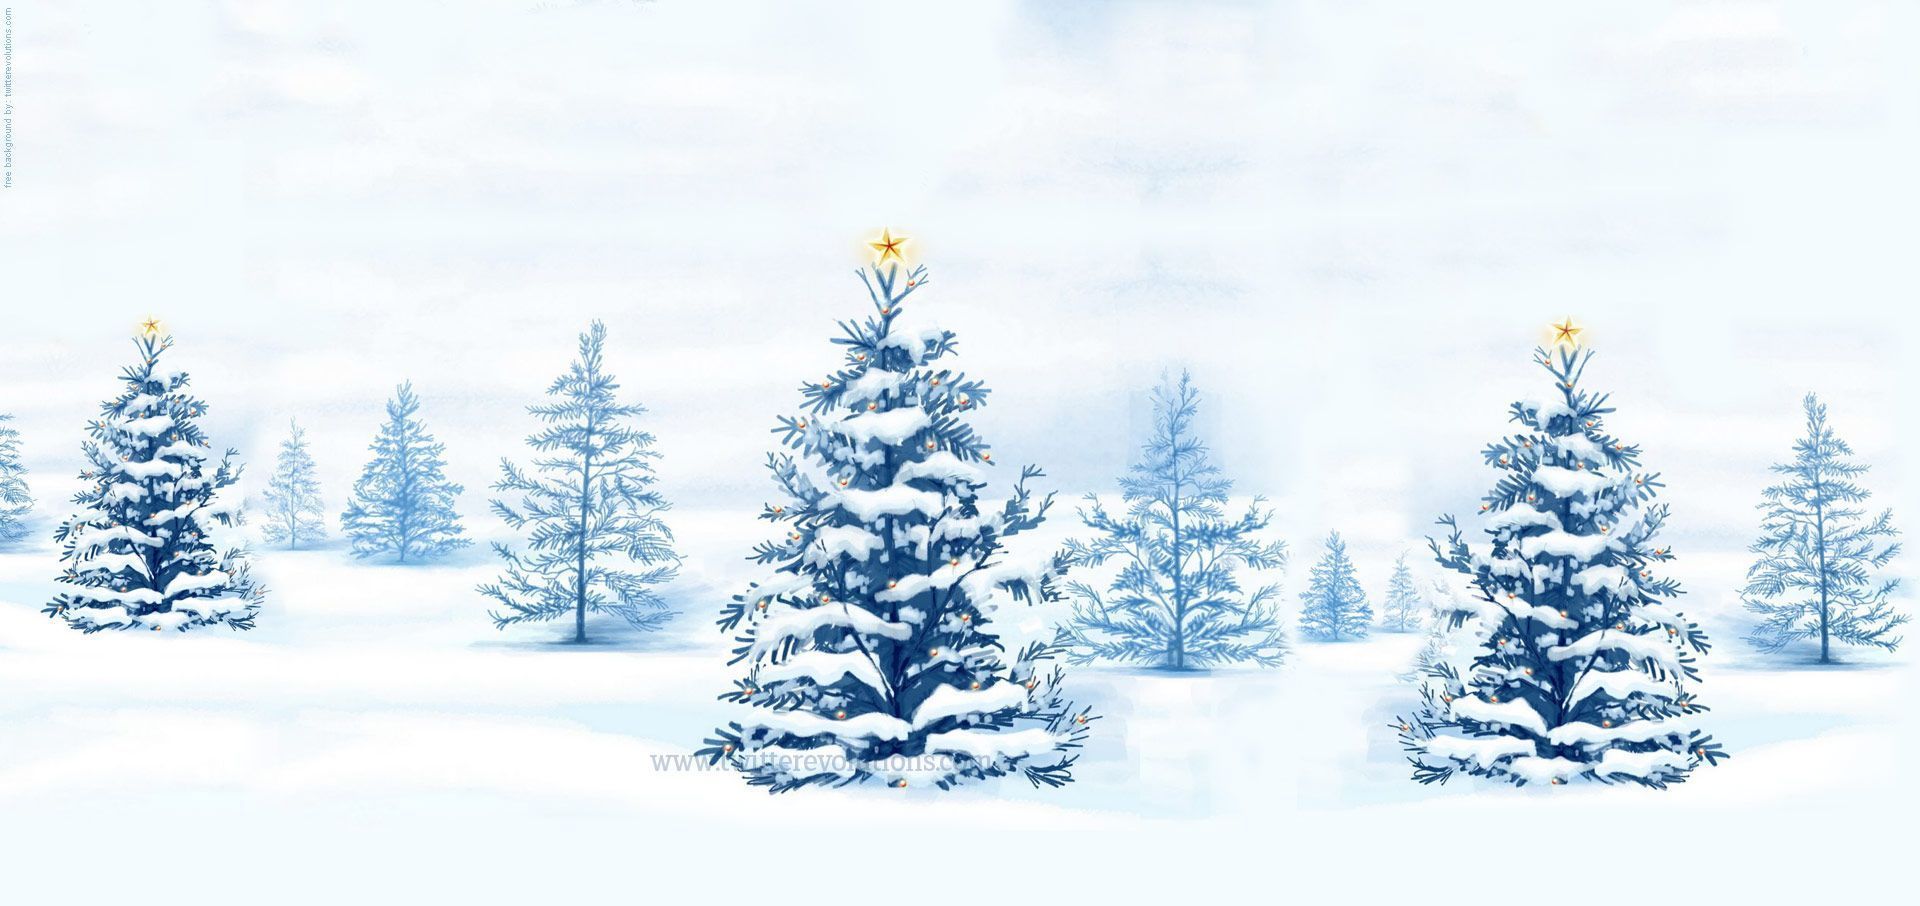 Winter snowy christmas trees Twitter background - Twitterevolutions